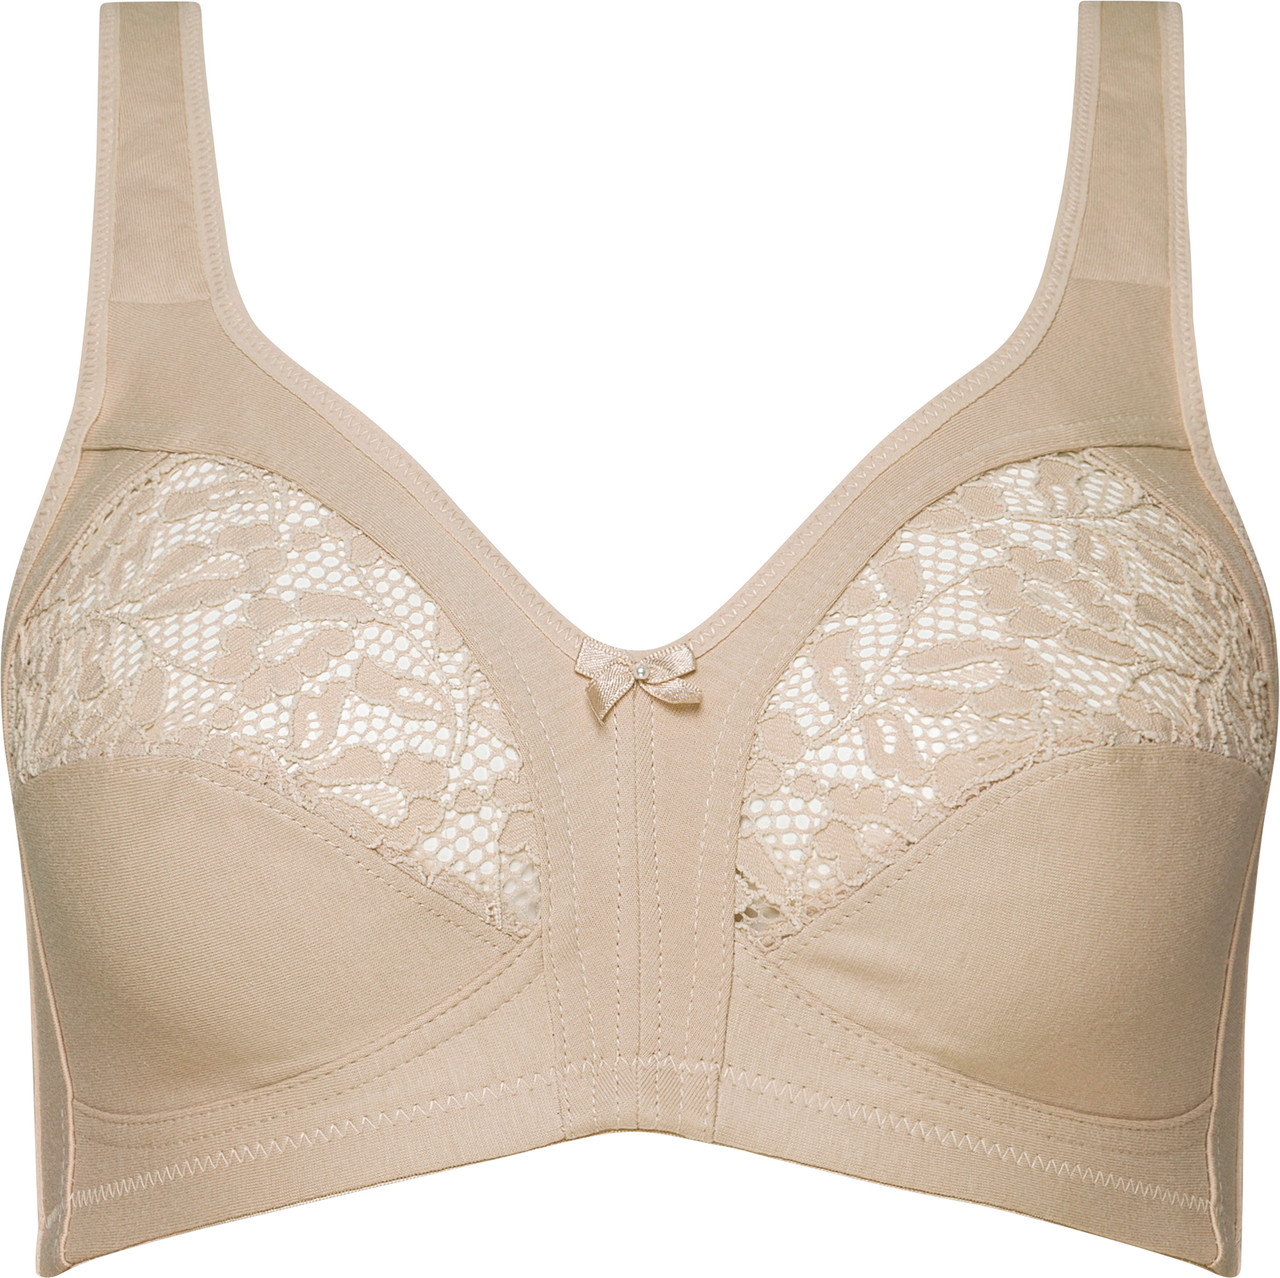 Naturana Wireless Cotton and Lace Full Cup Bra with Comfort Straps